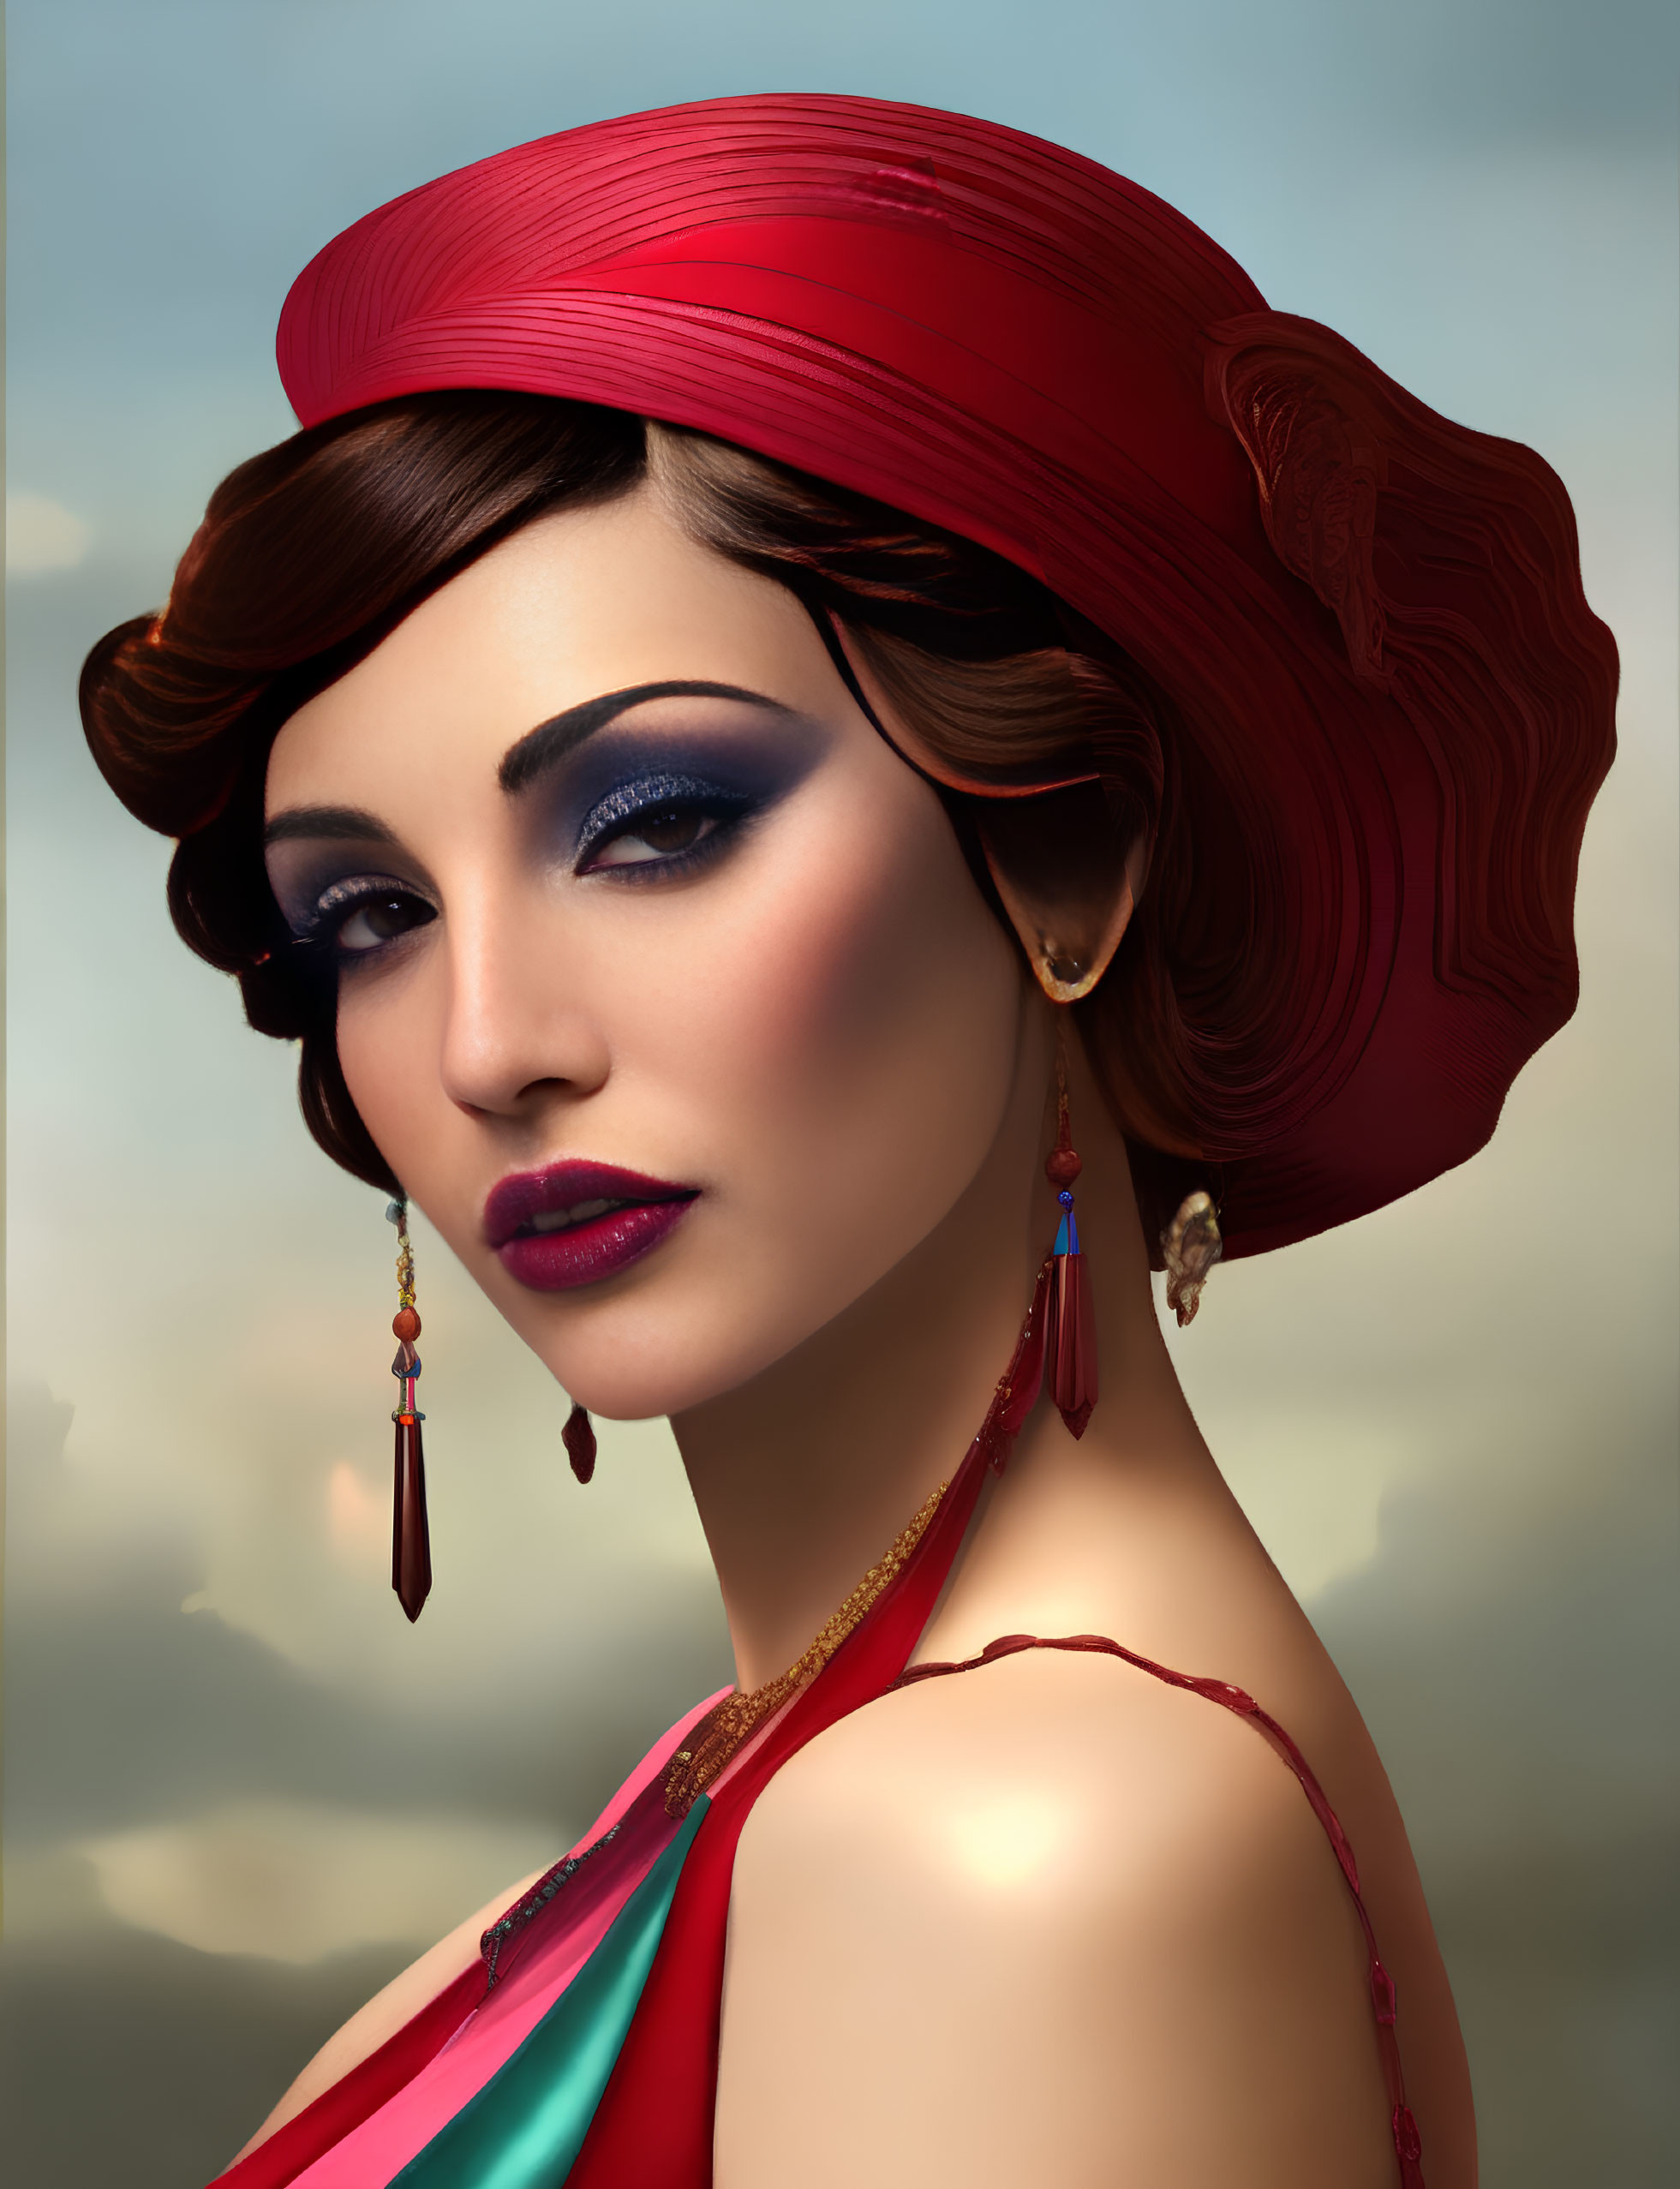 Stylized portrait of woman in red turban, dramatic makeup, colorful dress